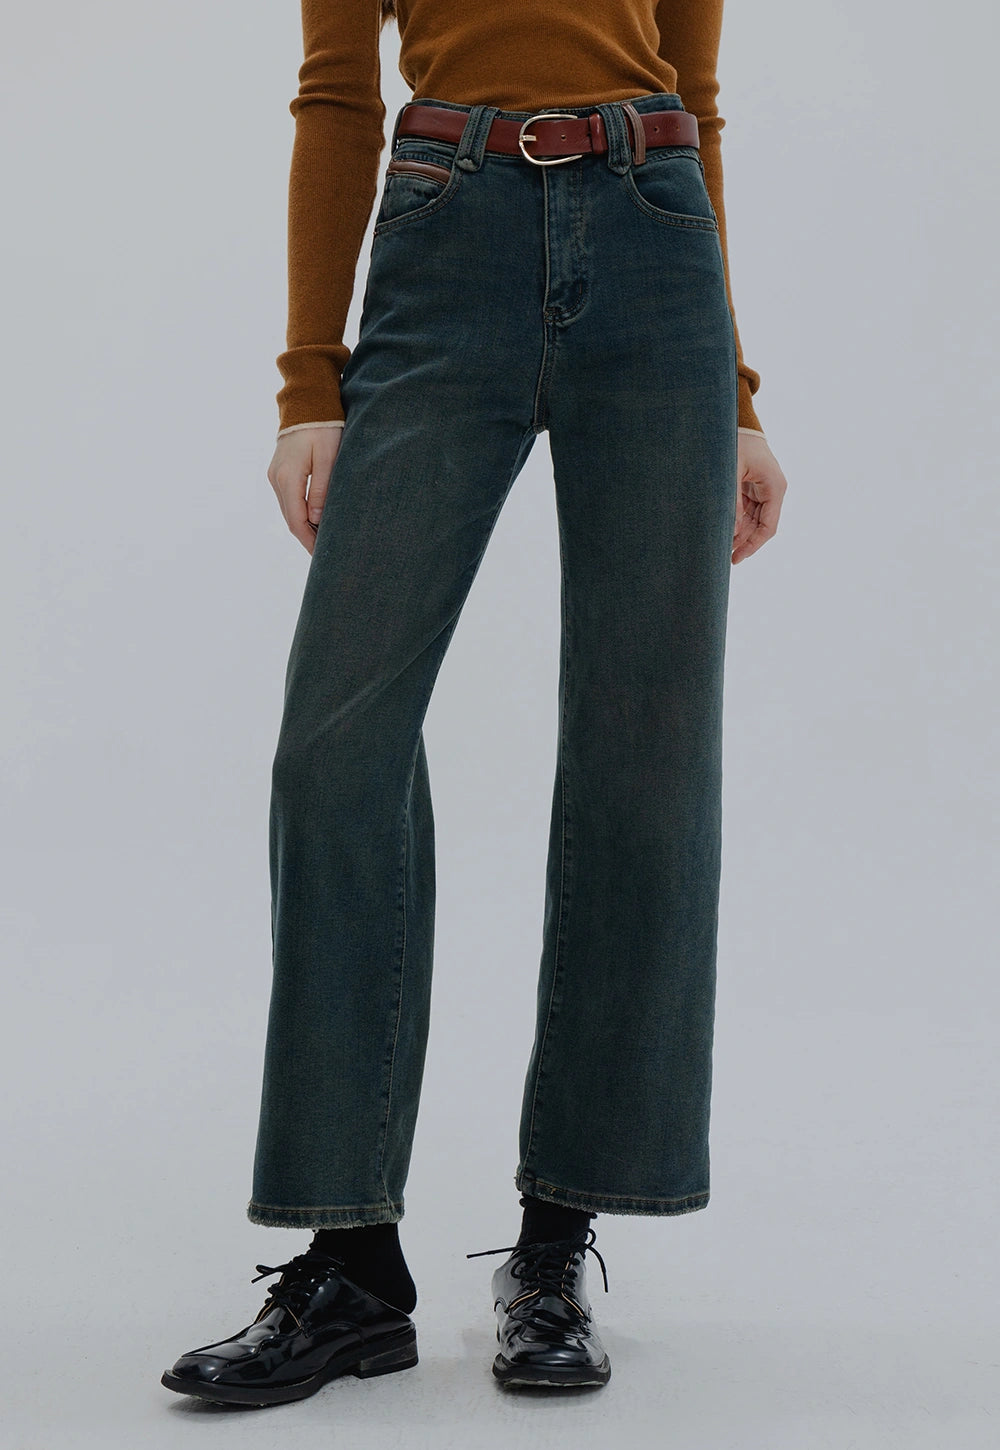 Women's Wide-Leg Denim Jeans with Contrast Stitching and Belt Loops